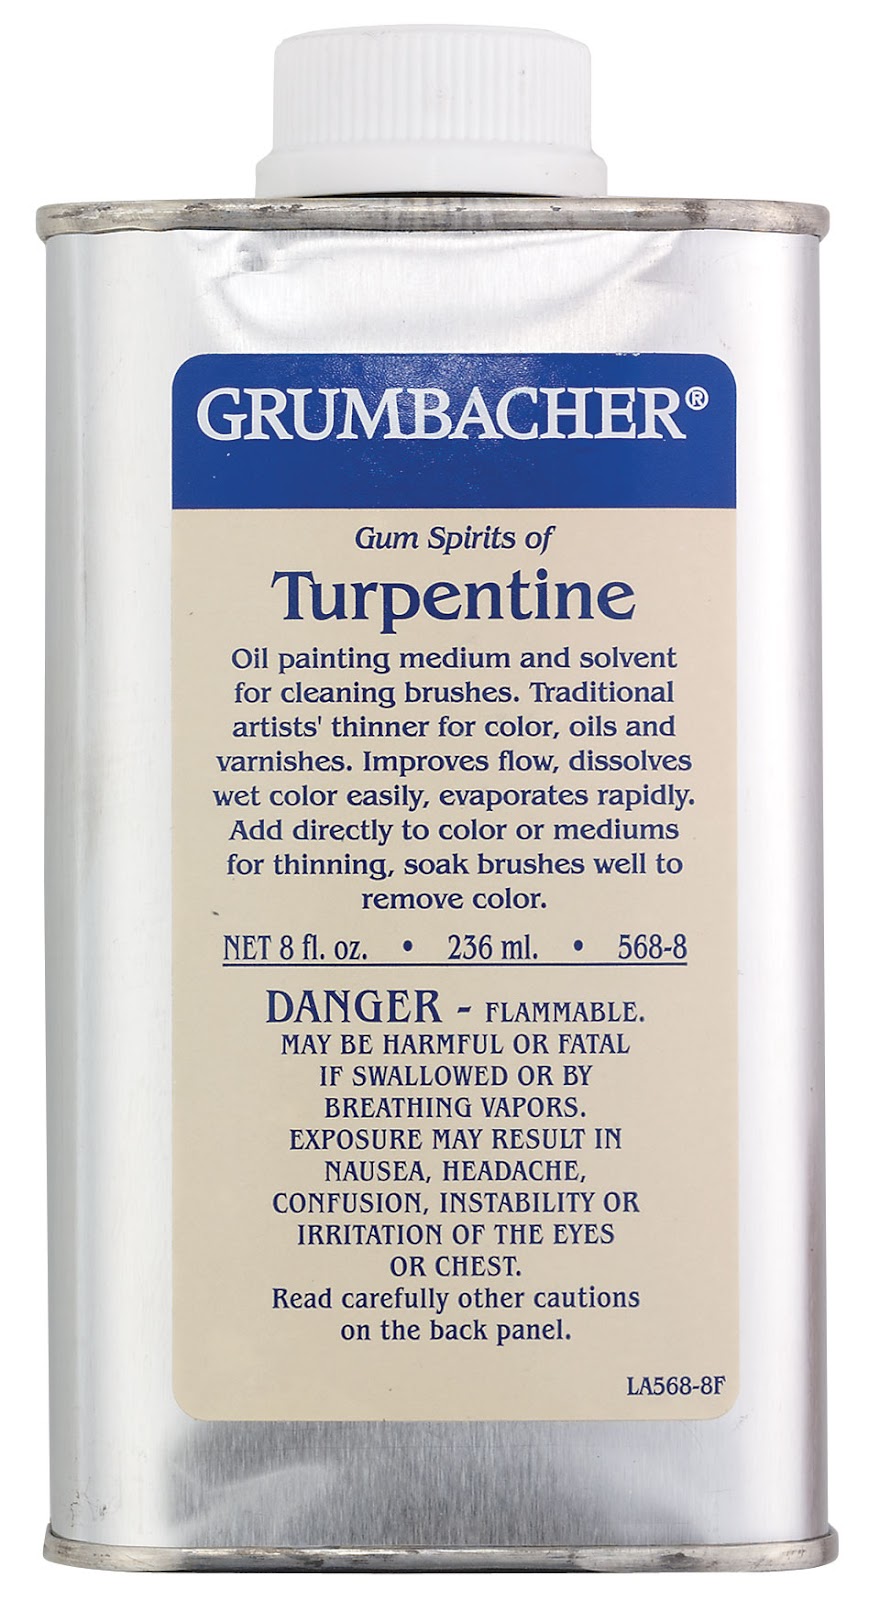 Studio Safety Pt. 2 – The Facts About Turpentine